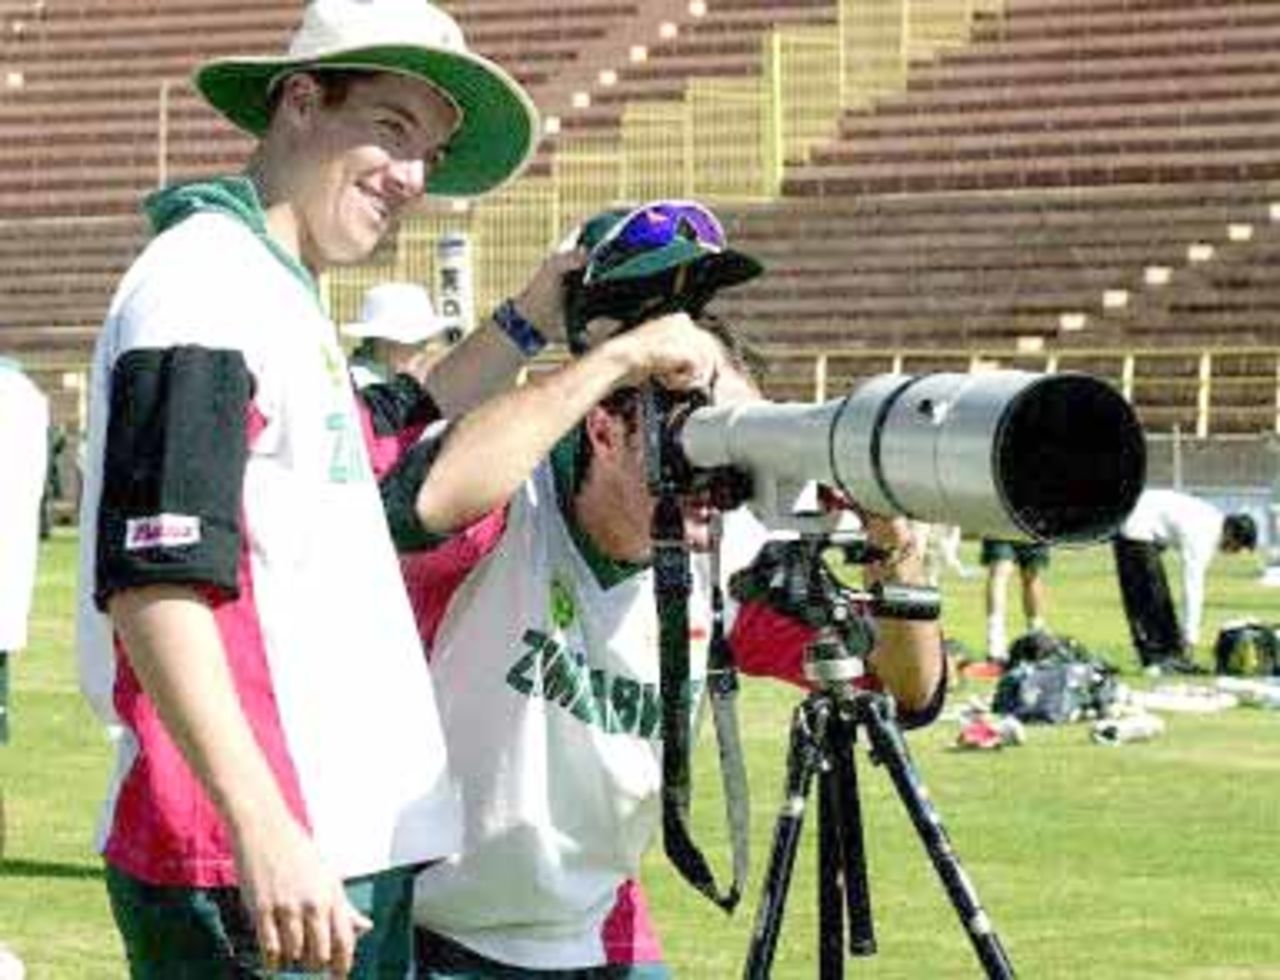 Zimbabwe cricketer Dirk Viljoen looks through a photographer's camera as his teammate Travis Friend (L) holds his cap during a practice session at Jodhpur cricket ground 07 December 2000, in Jodhpur. Zimbabwe will play its third one-day cricket match against India 08 December. India leads the series 2-0.